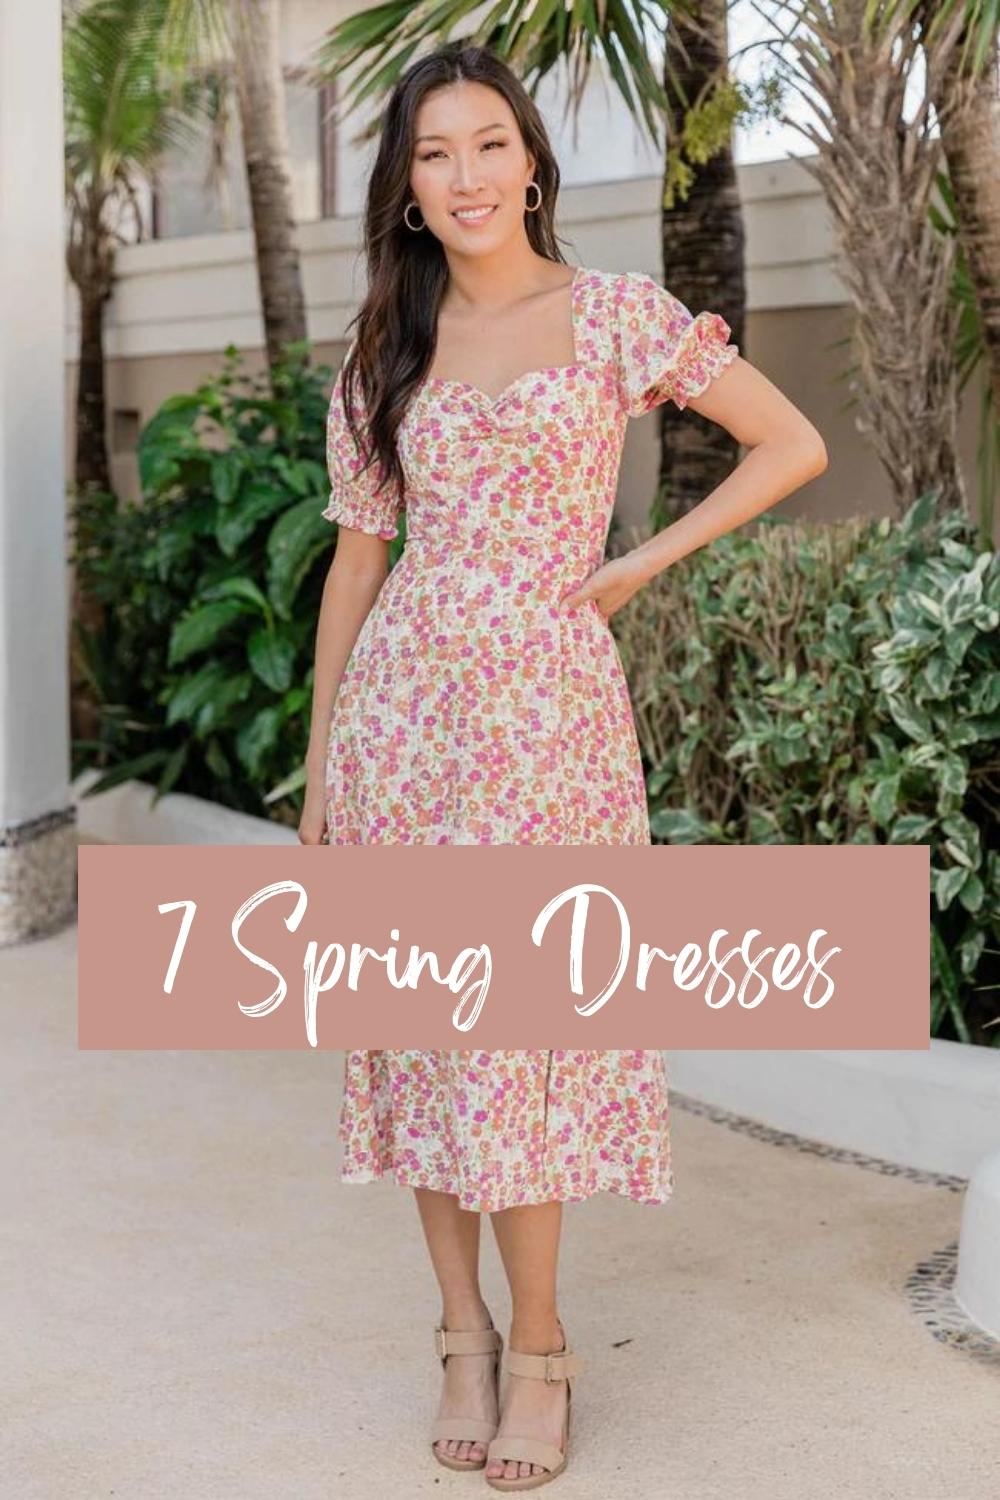 https://www.thisfabulouslifeblog.com/wp-content/uploads/2022/03/7-Spring-Dresses-Spring-floral-dresses-for-women-what-to-wear-to-work-in-the-Spring-midi-dresses-women-over-40-fashion.jpg